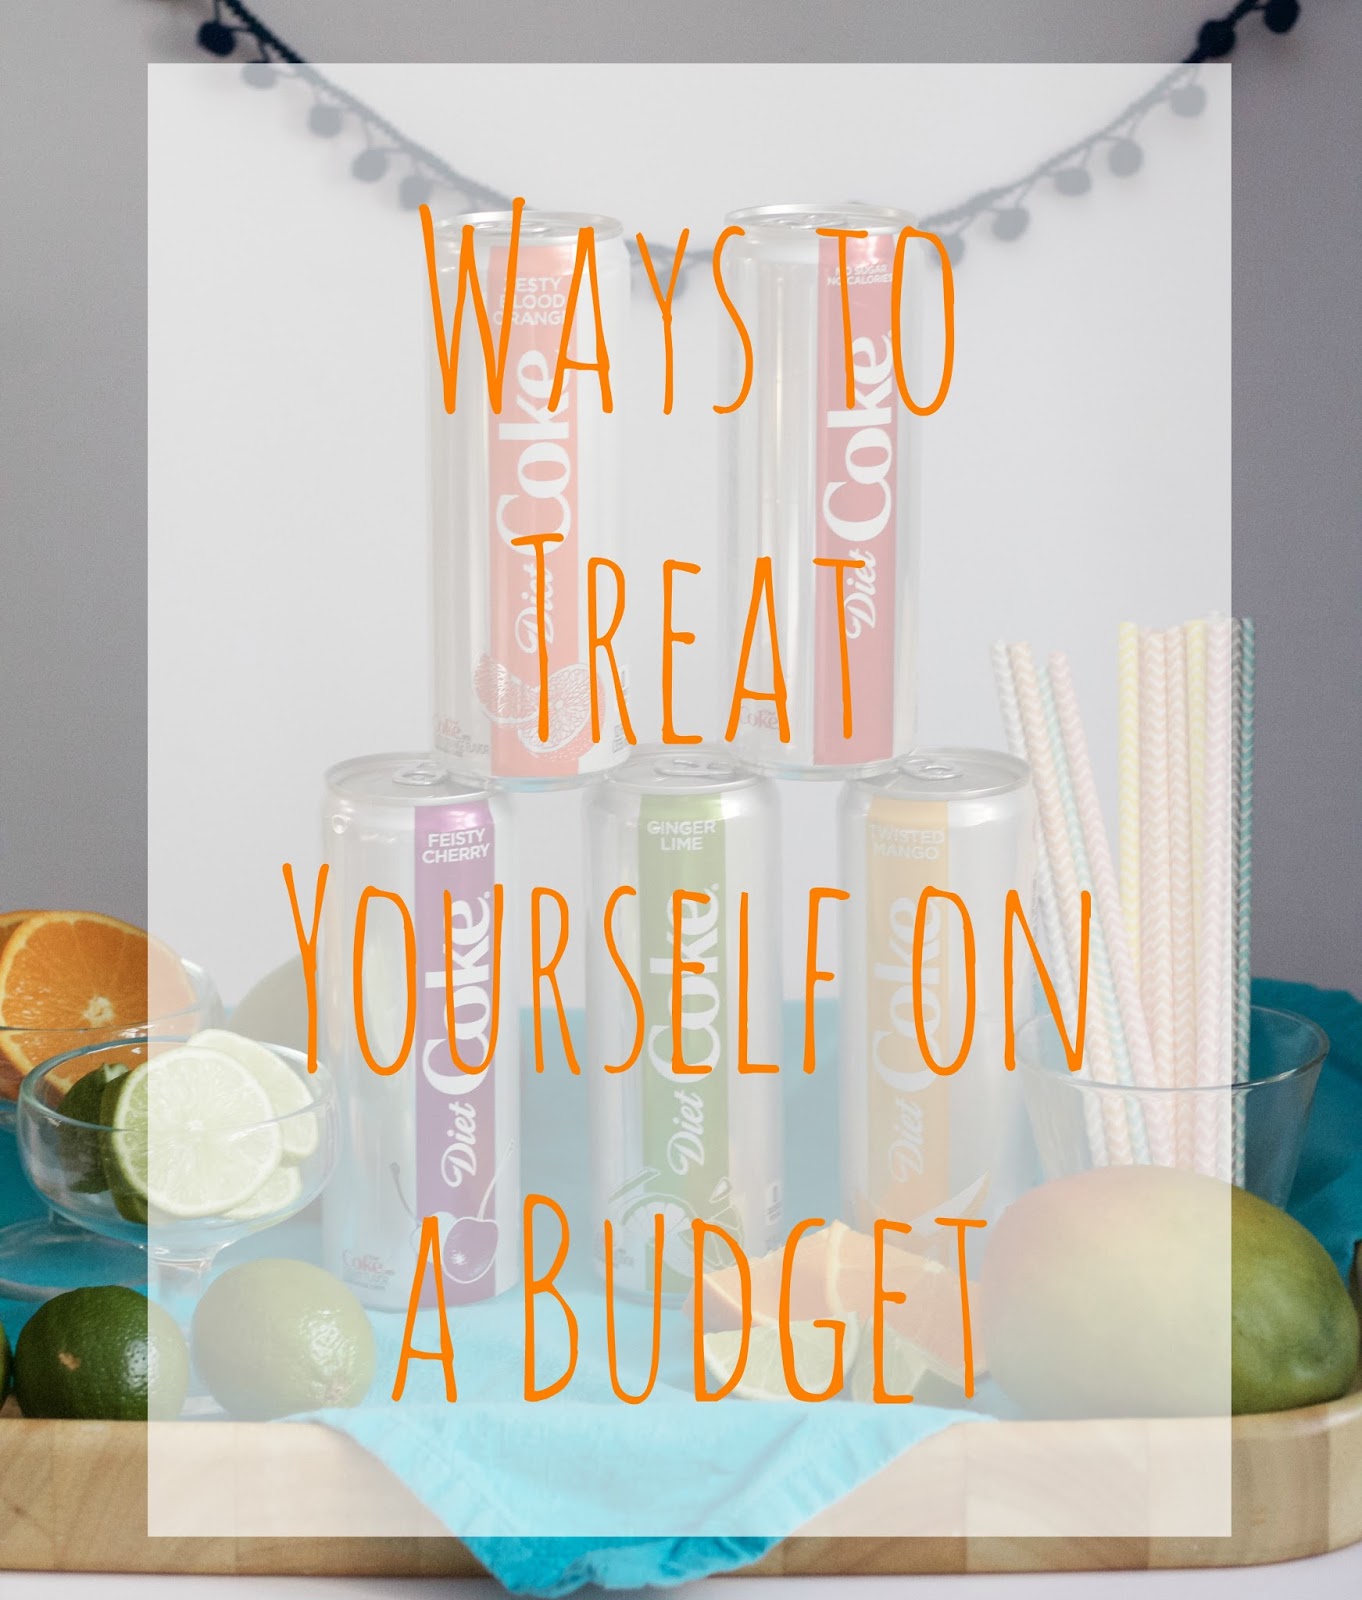 Ways to Treat Yourself on a Budget